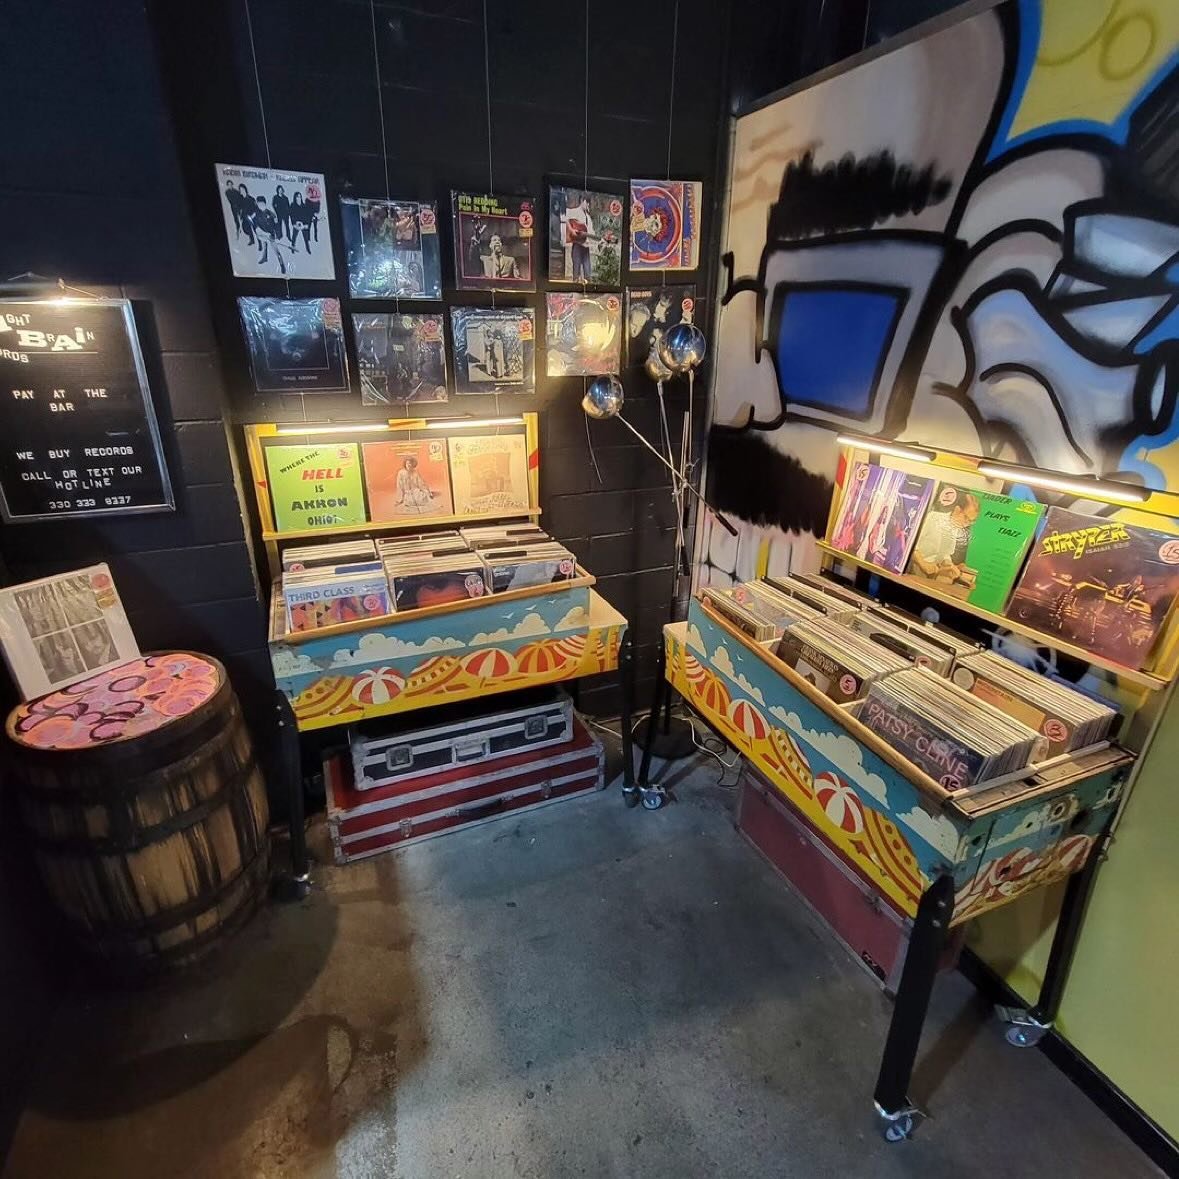 Explore a world of vinyl where creativity meets curiosity at Right Brain Record Store, nestled in the brewery&rsquo;s ballroom. Stop by this evening and browse this awesome record selection, grab a slice from @roxburypizza, and hang with Right Brain 